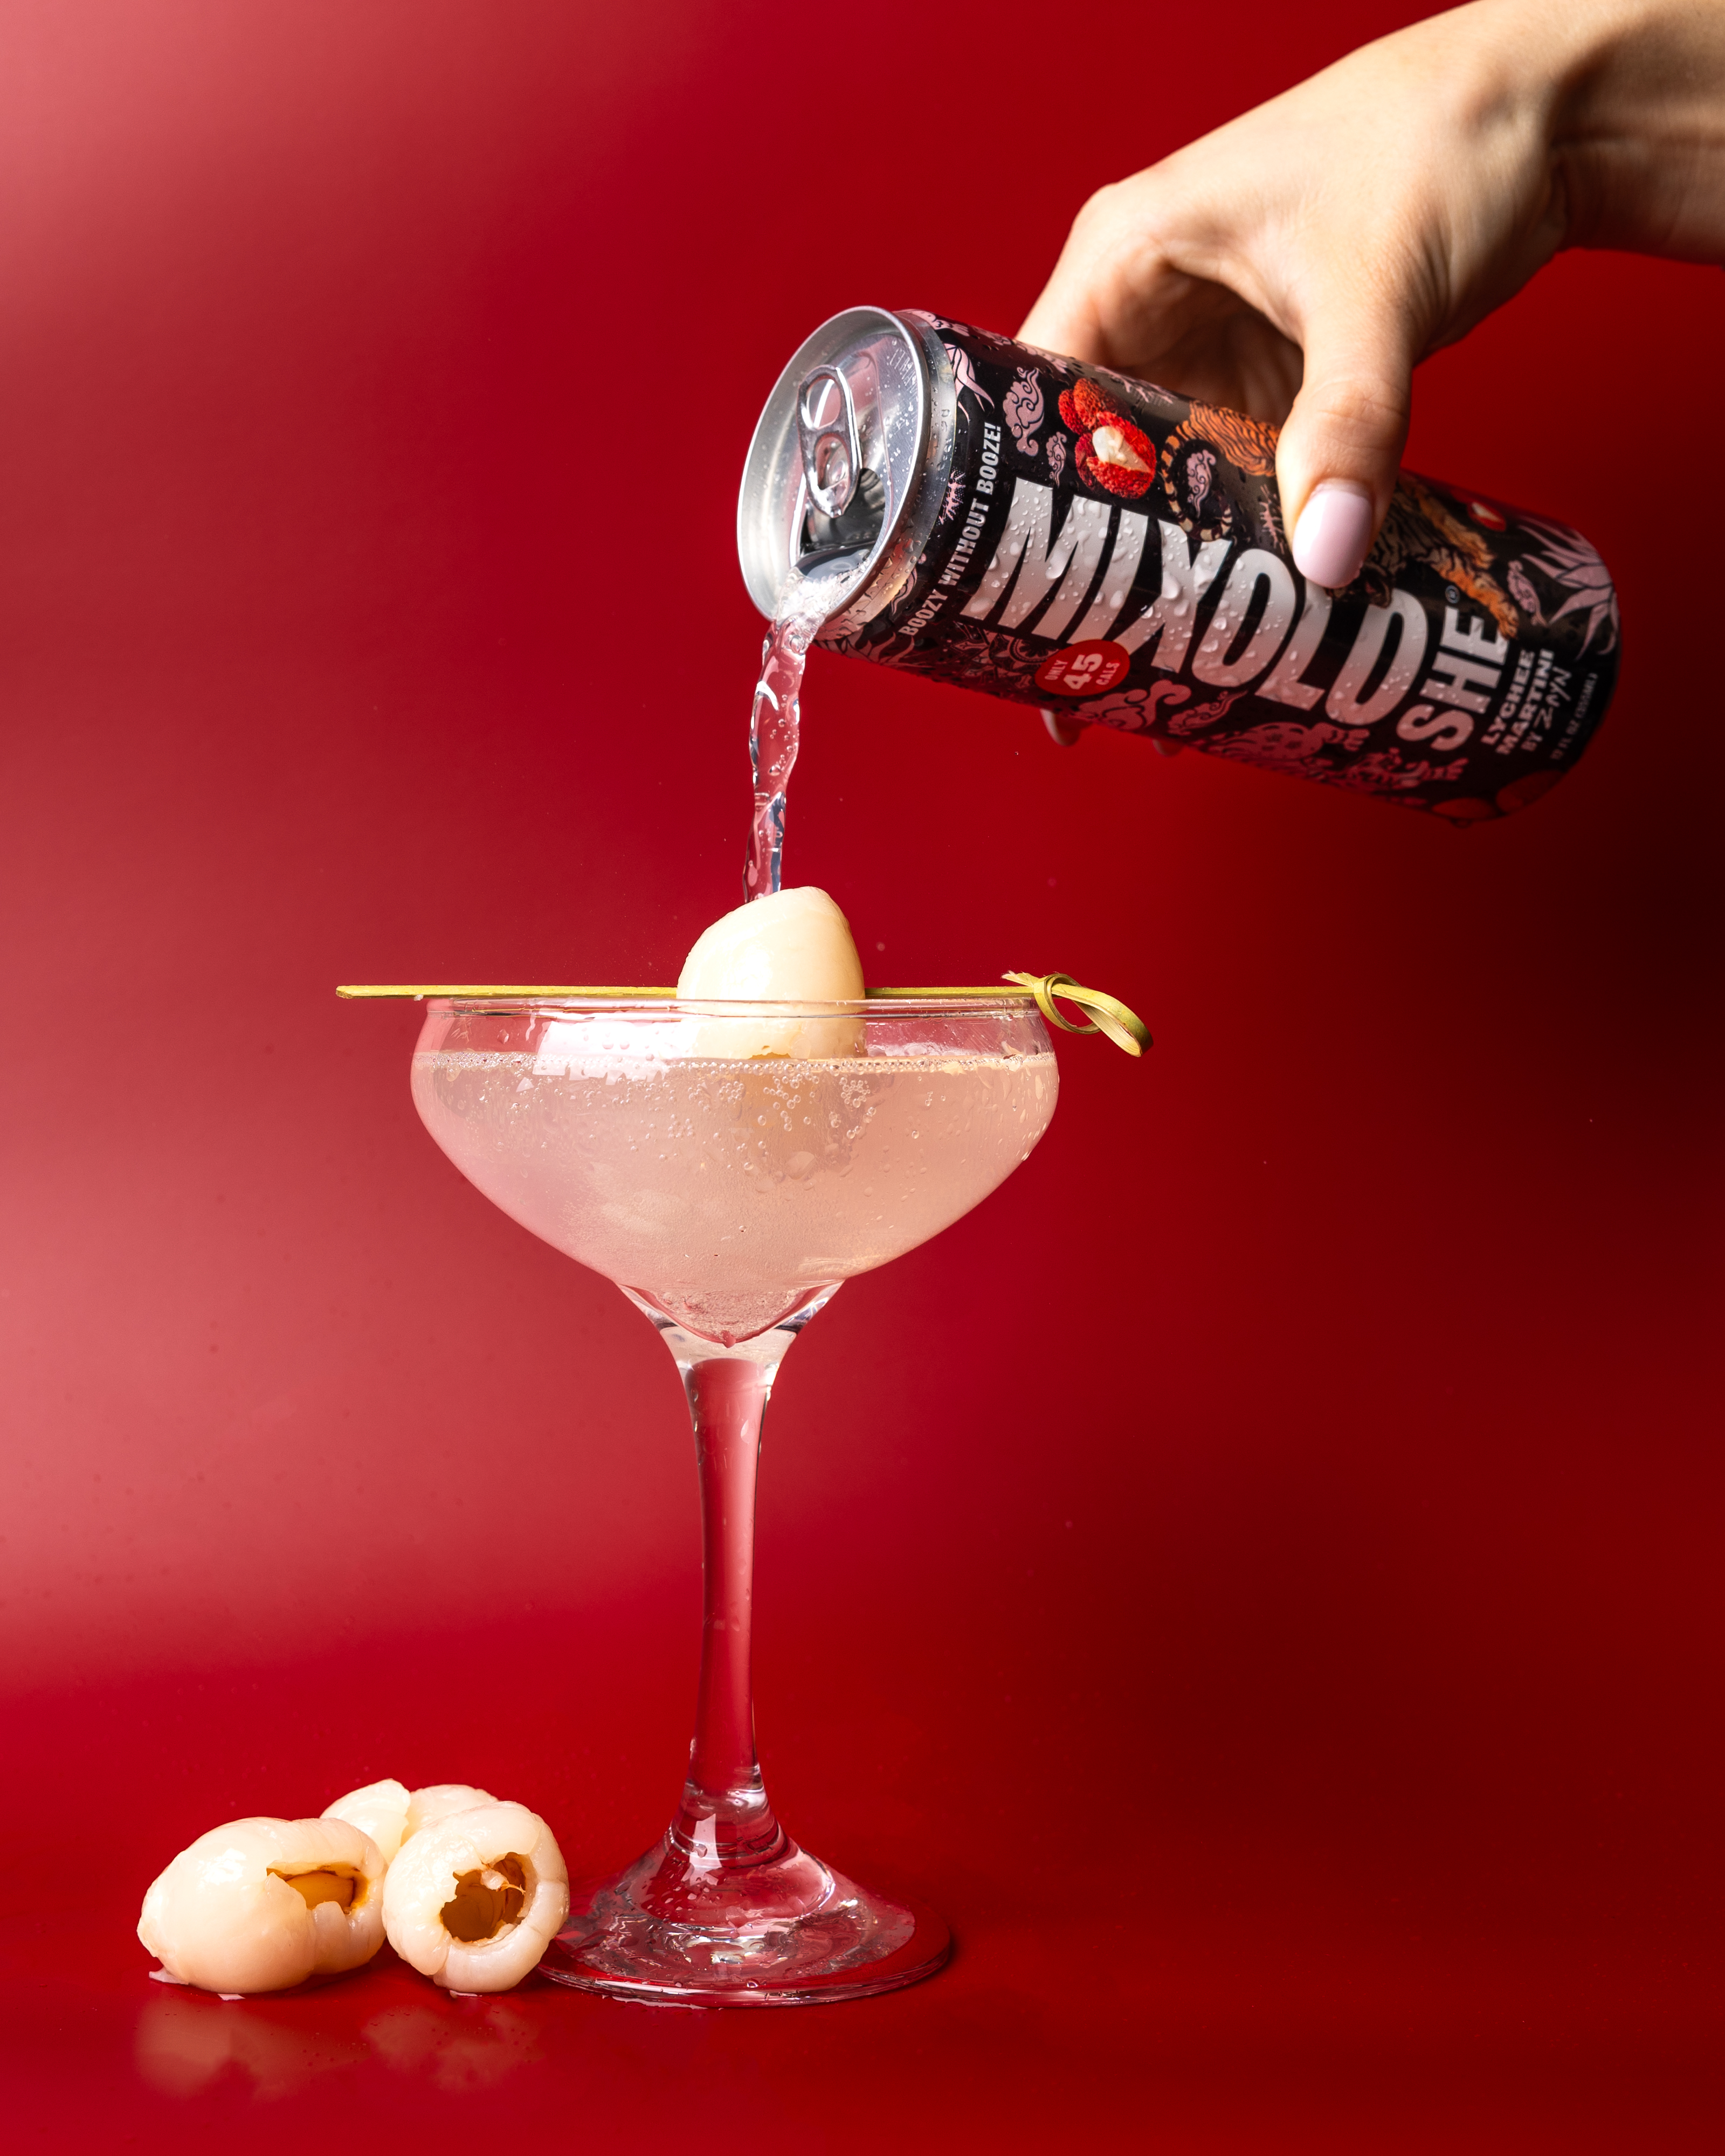 Pour your own lychee martini